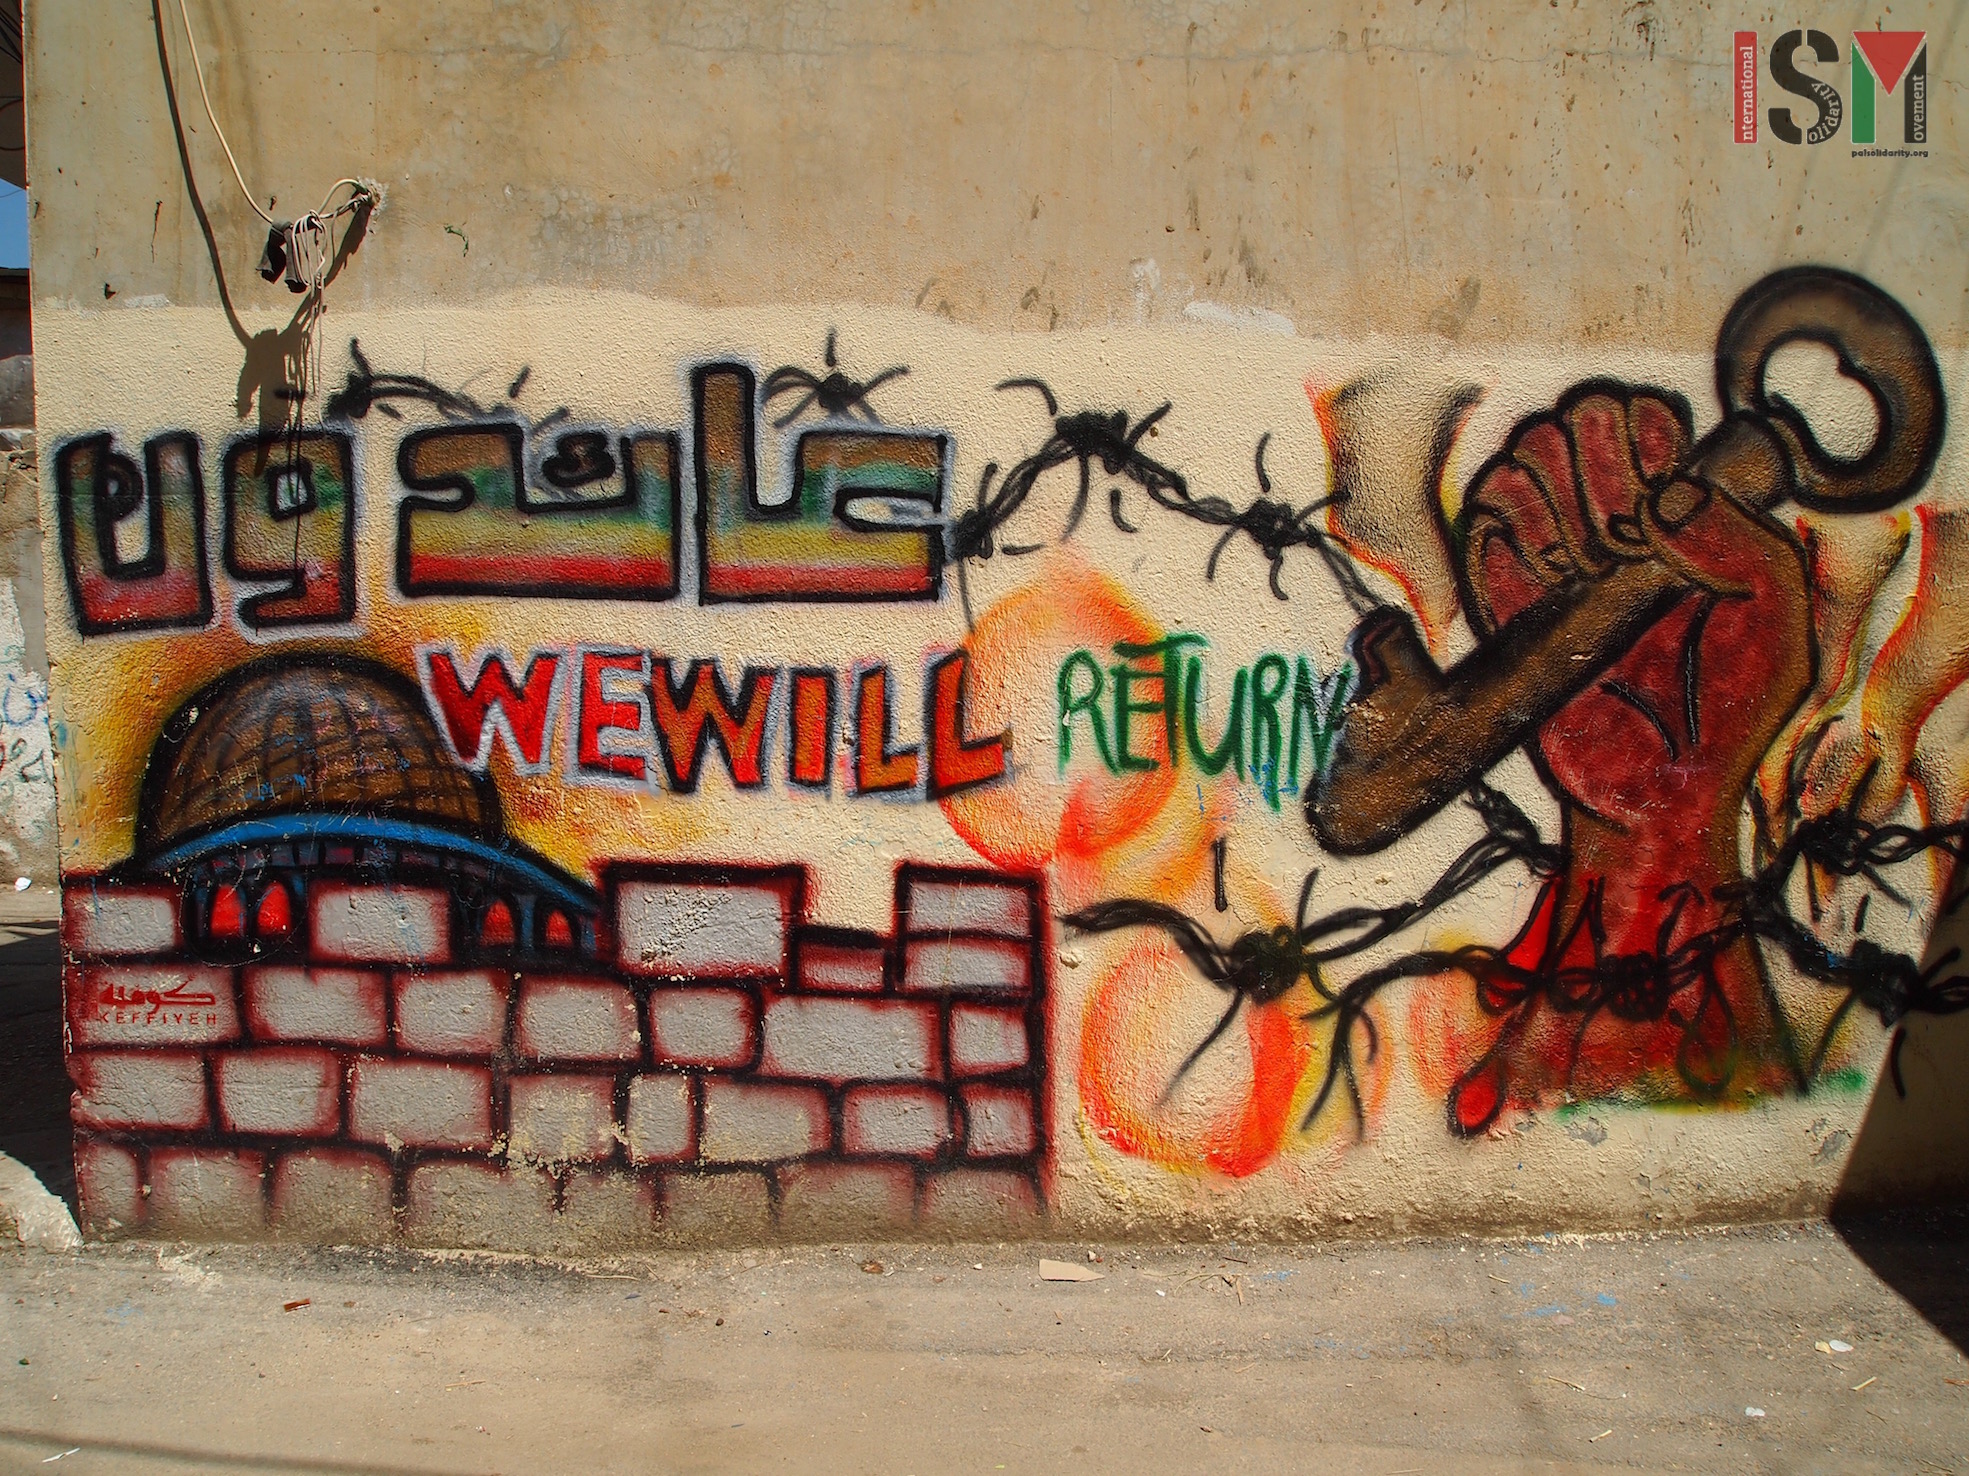 "We will return". The camp's walls are covered in graffiti of resistance